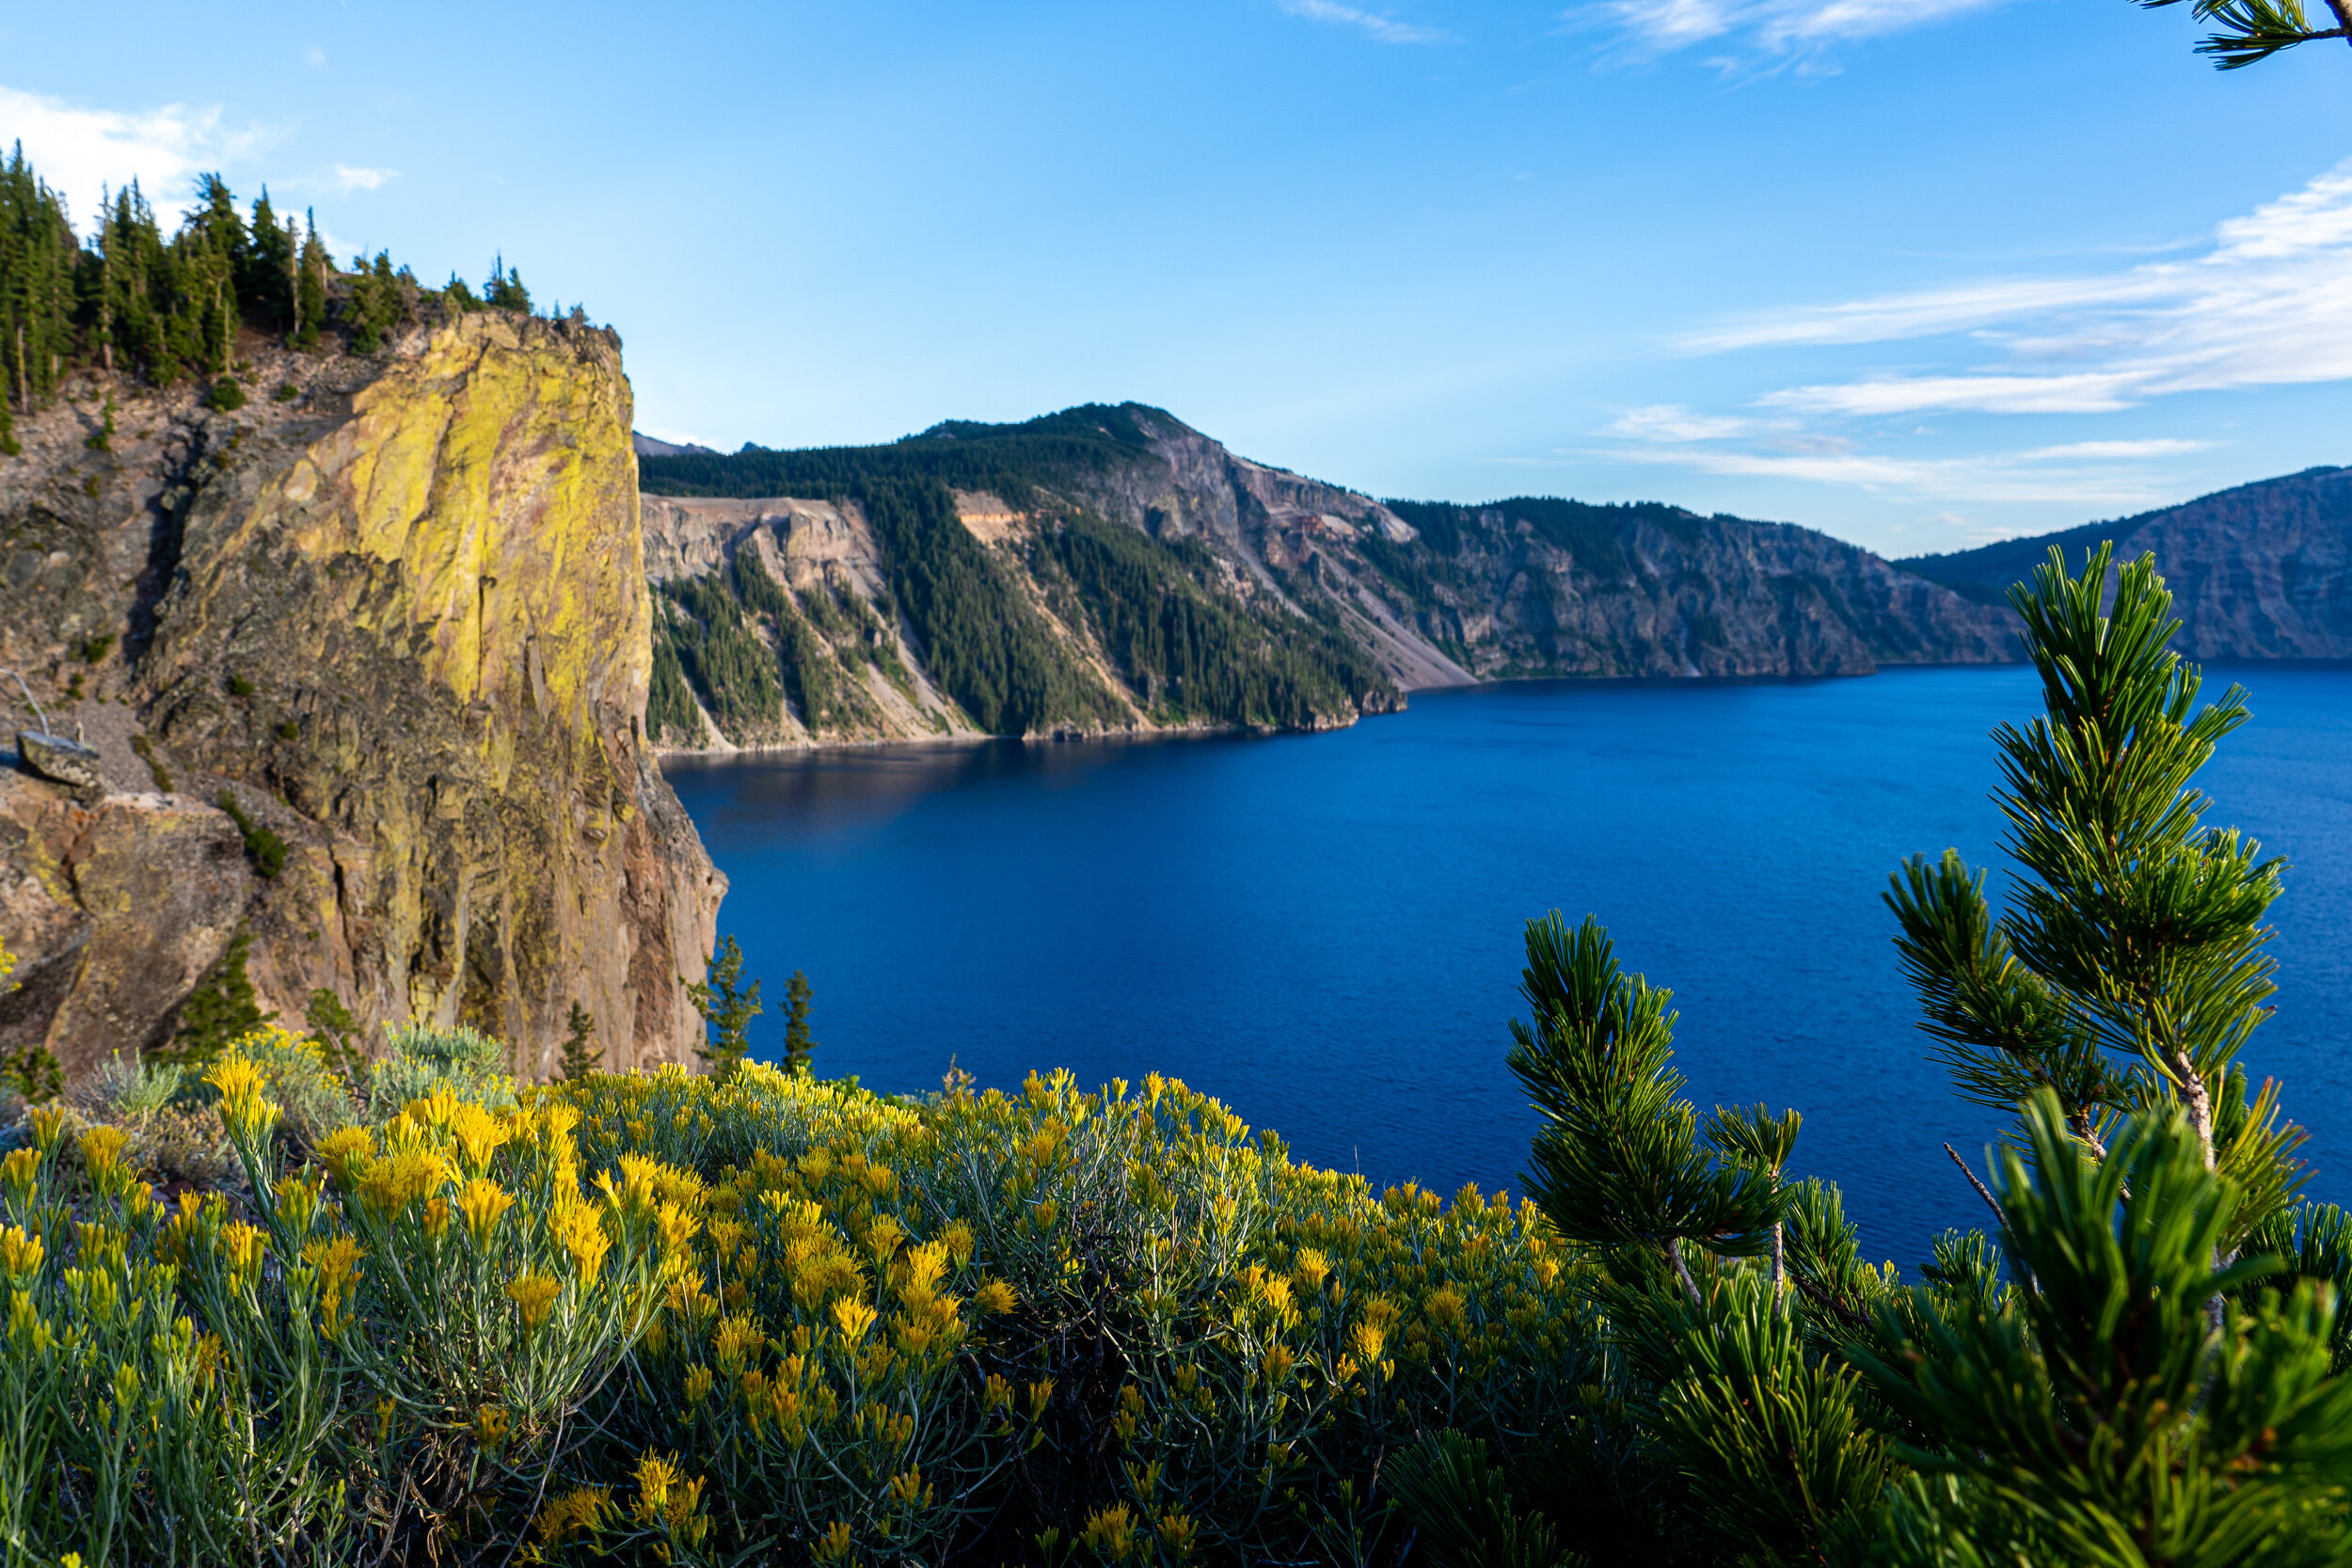  There could never be too many photos taken of  Crater Lake.  The pictures all look like they’ve been augmented, but the lake is absolutely as blue in person as it is in the photos. Crater lake is a collapsed volcano that formed the deepest lake in A